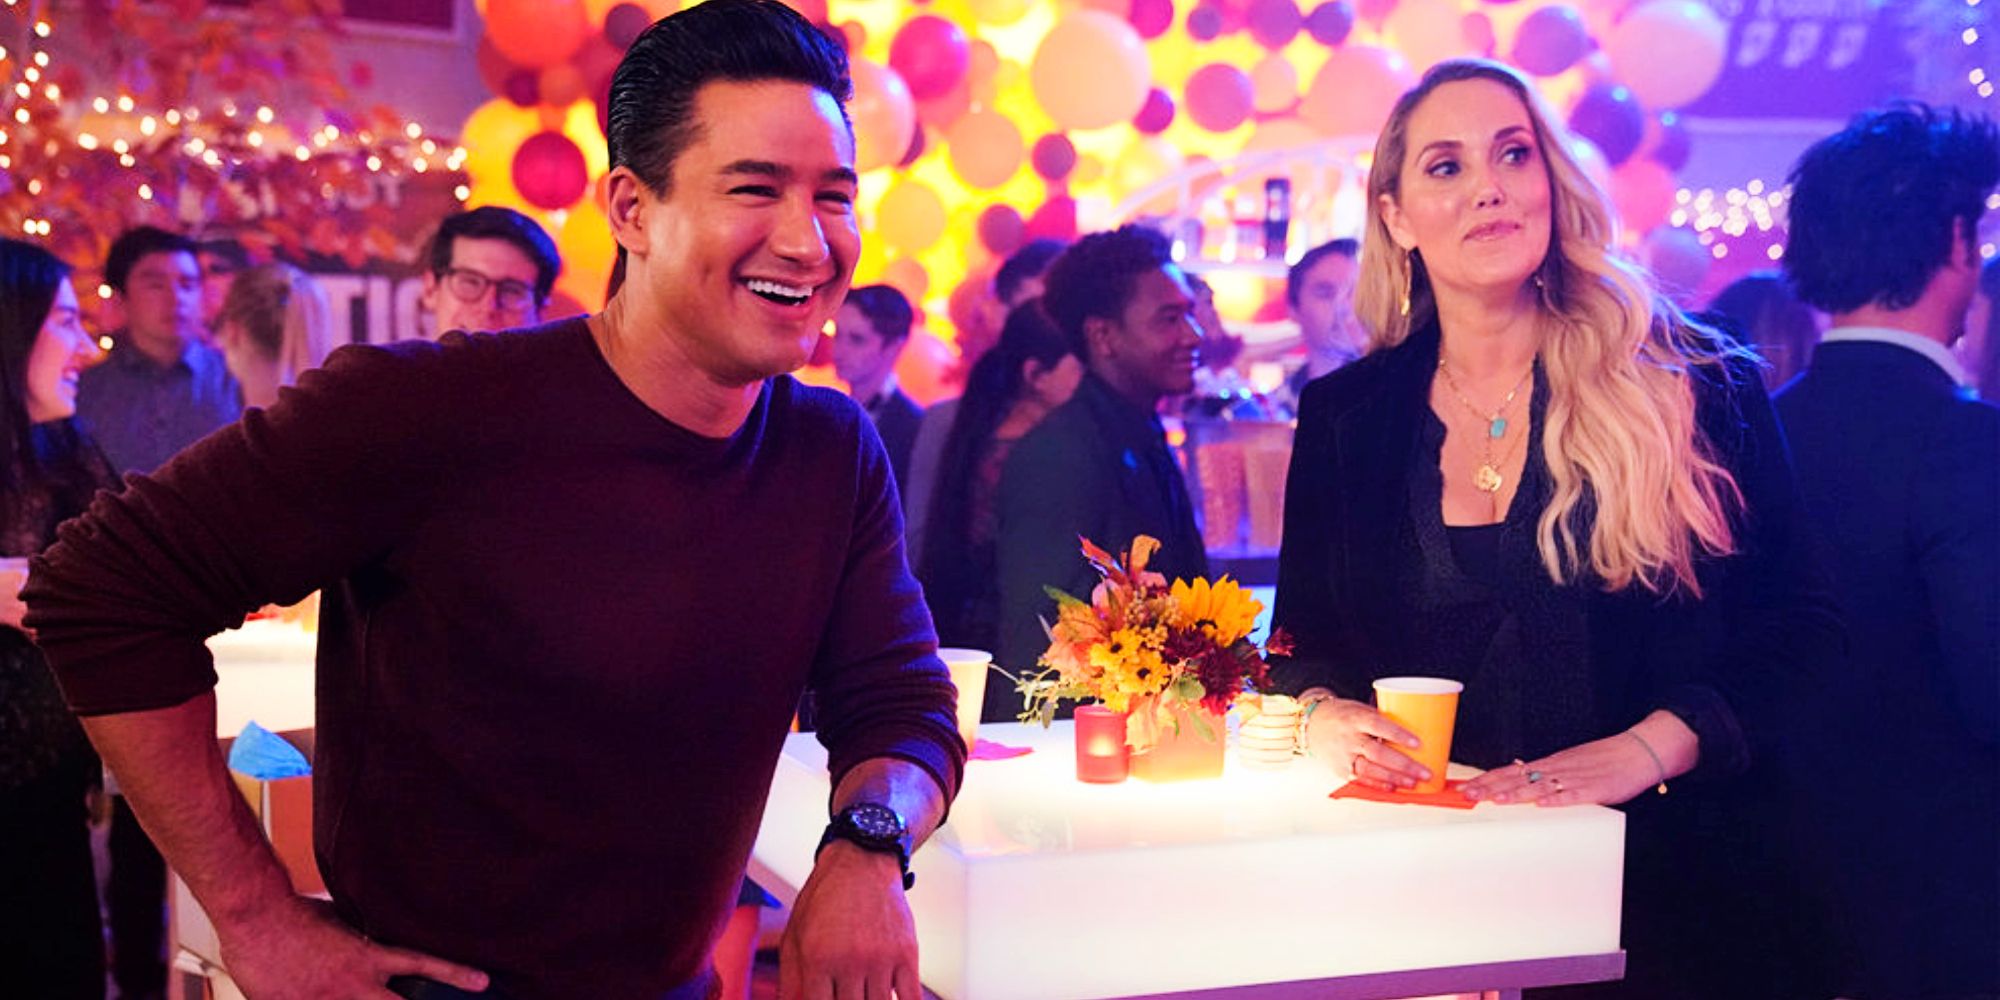 Elizabeth Berkley as Jessie Spano and Mario Lopez as Slater in Saved by the Bell